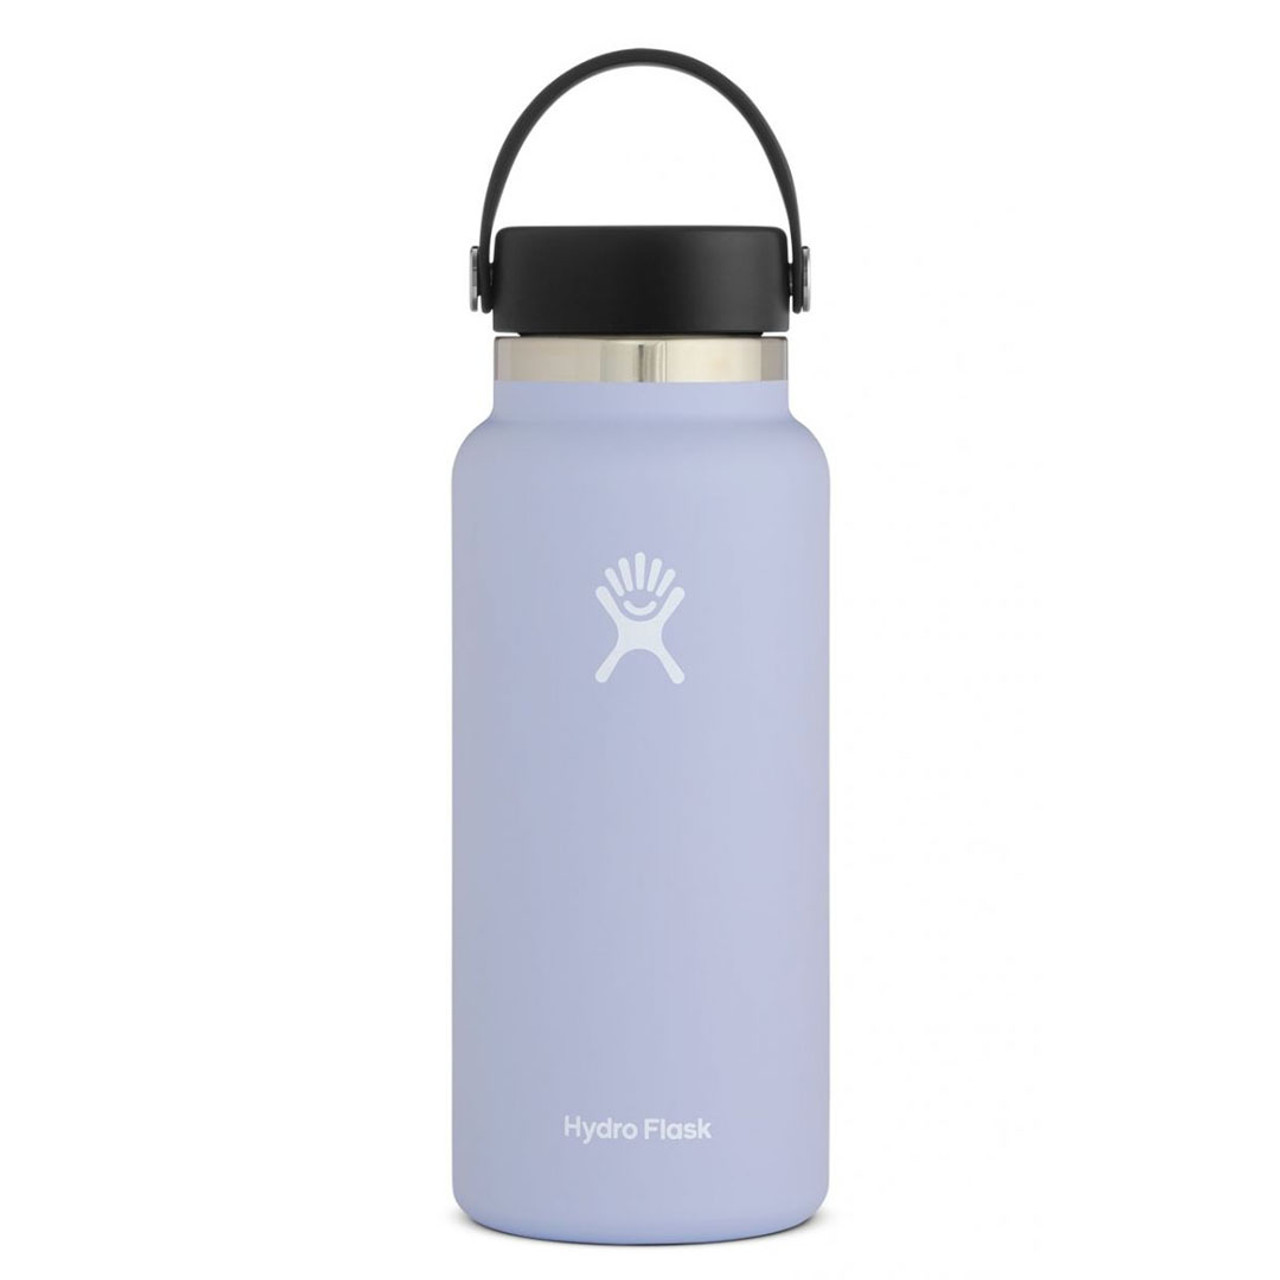 Hydro Flask Wide Mouth Lids- Accessory for Wide Mouth Water Bottle